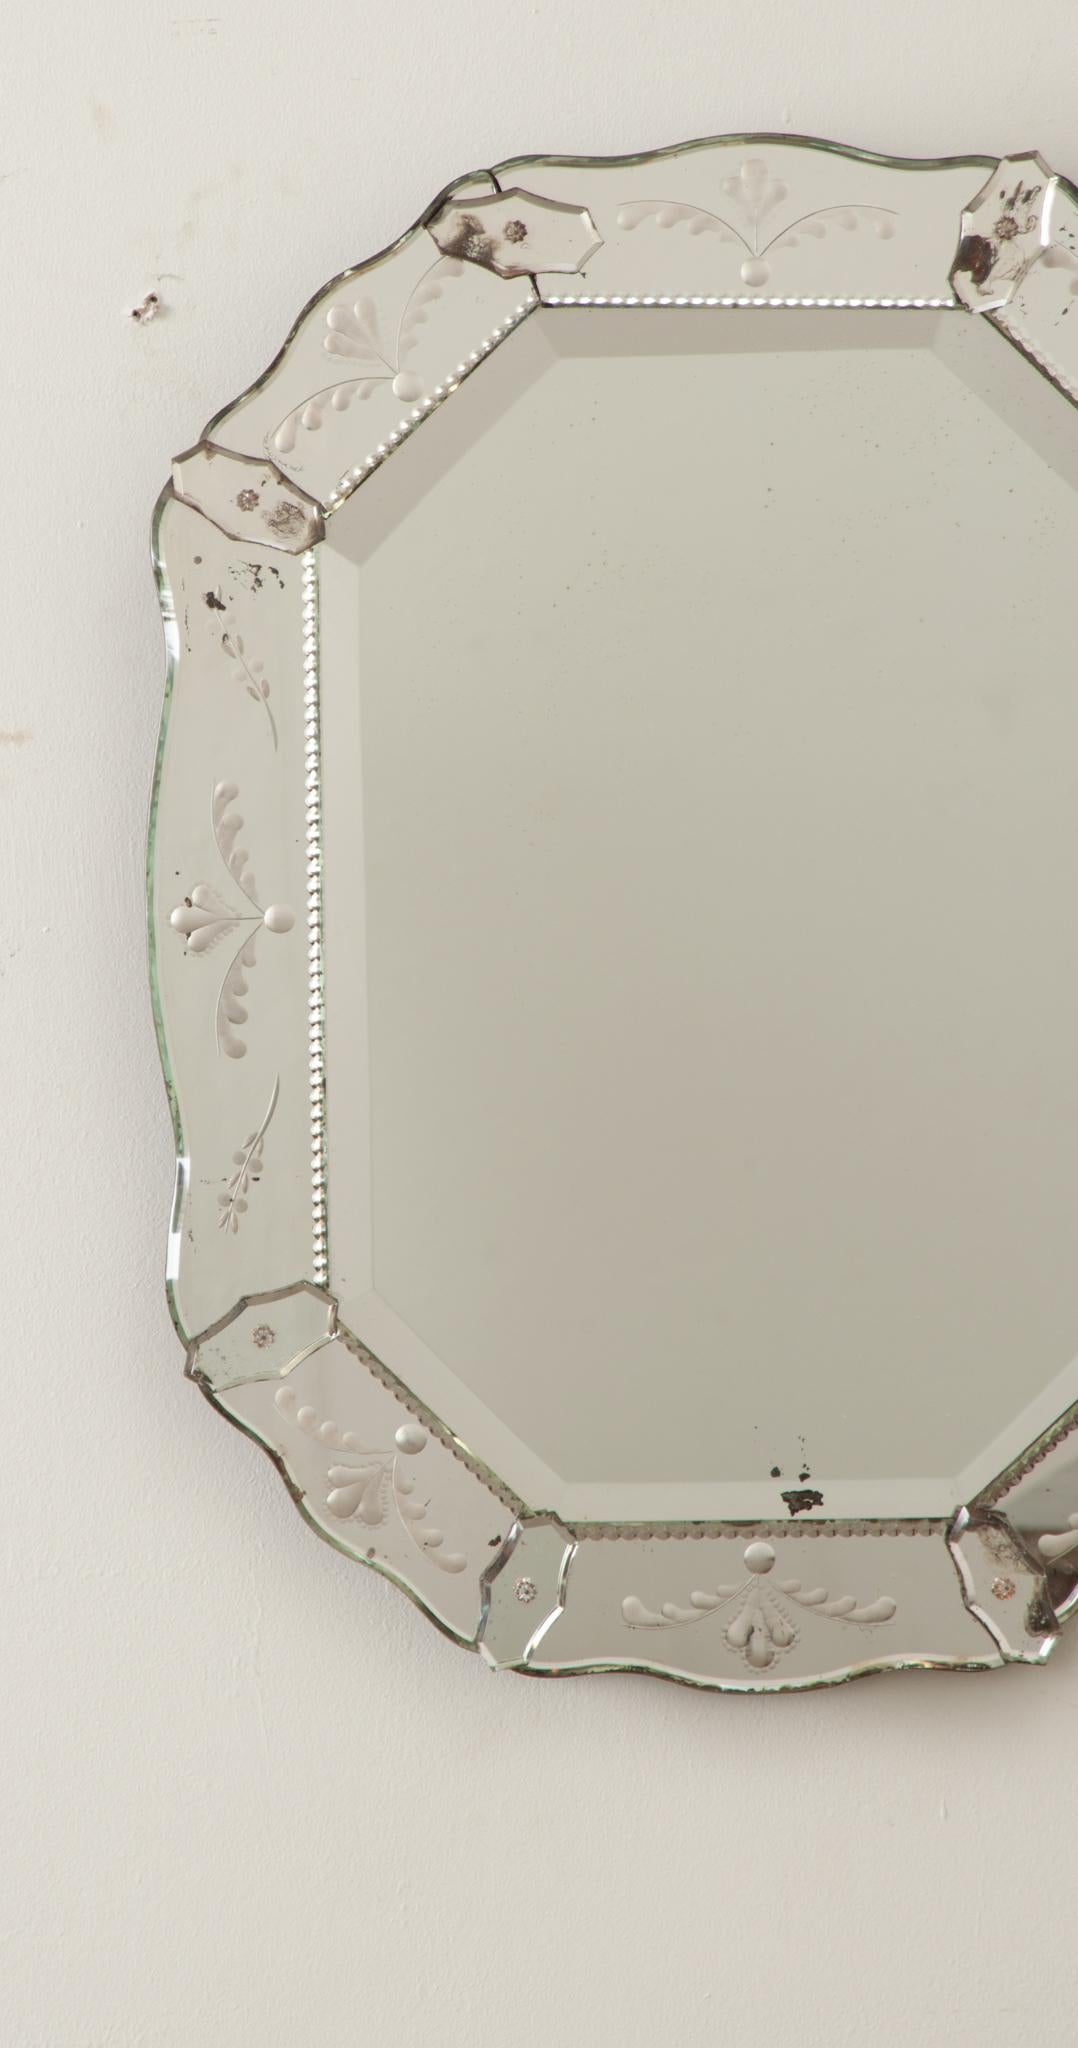 The frame of this unique Italian octagon shaped mirror features beautiful floral etchings. Inside the mirrored frame is a hand cut beveled mirror plate. Foxing is found throughout this fixture, typical of a mirror of this age. The whole is fixed on